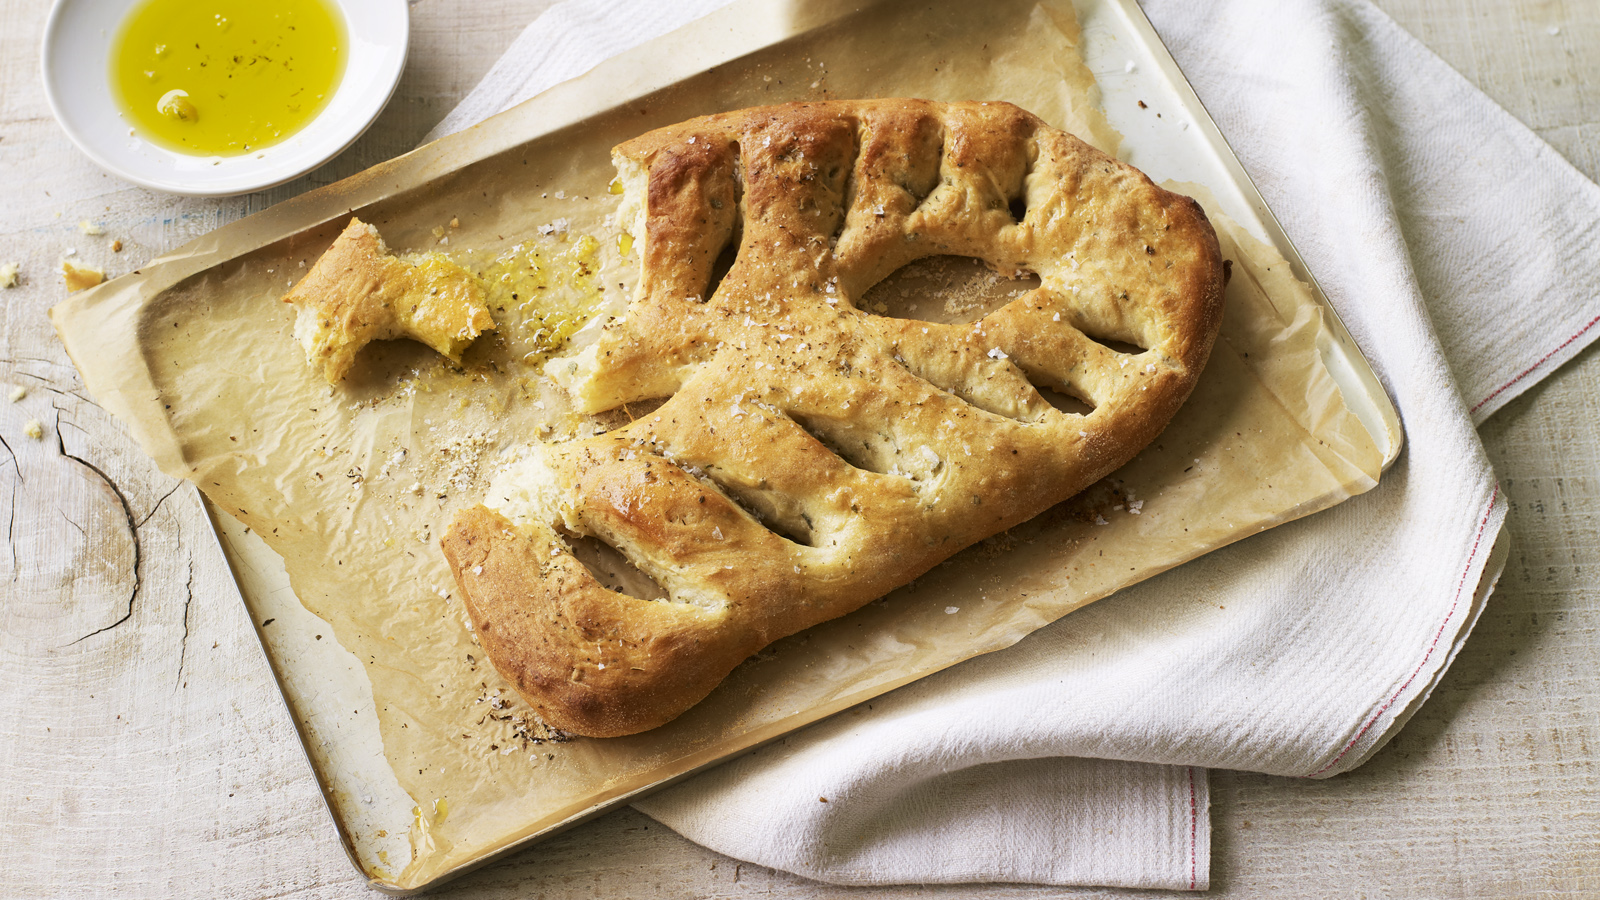 Making Your Own Fougasse Is Easy